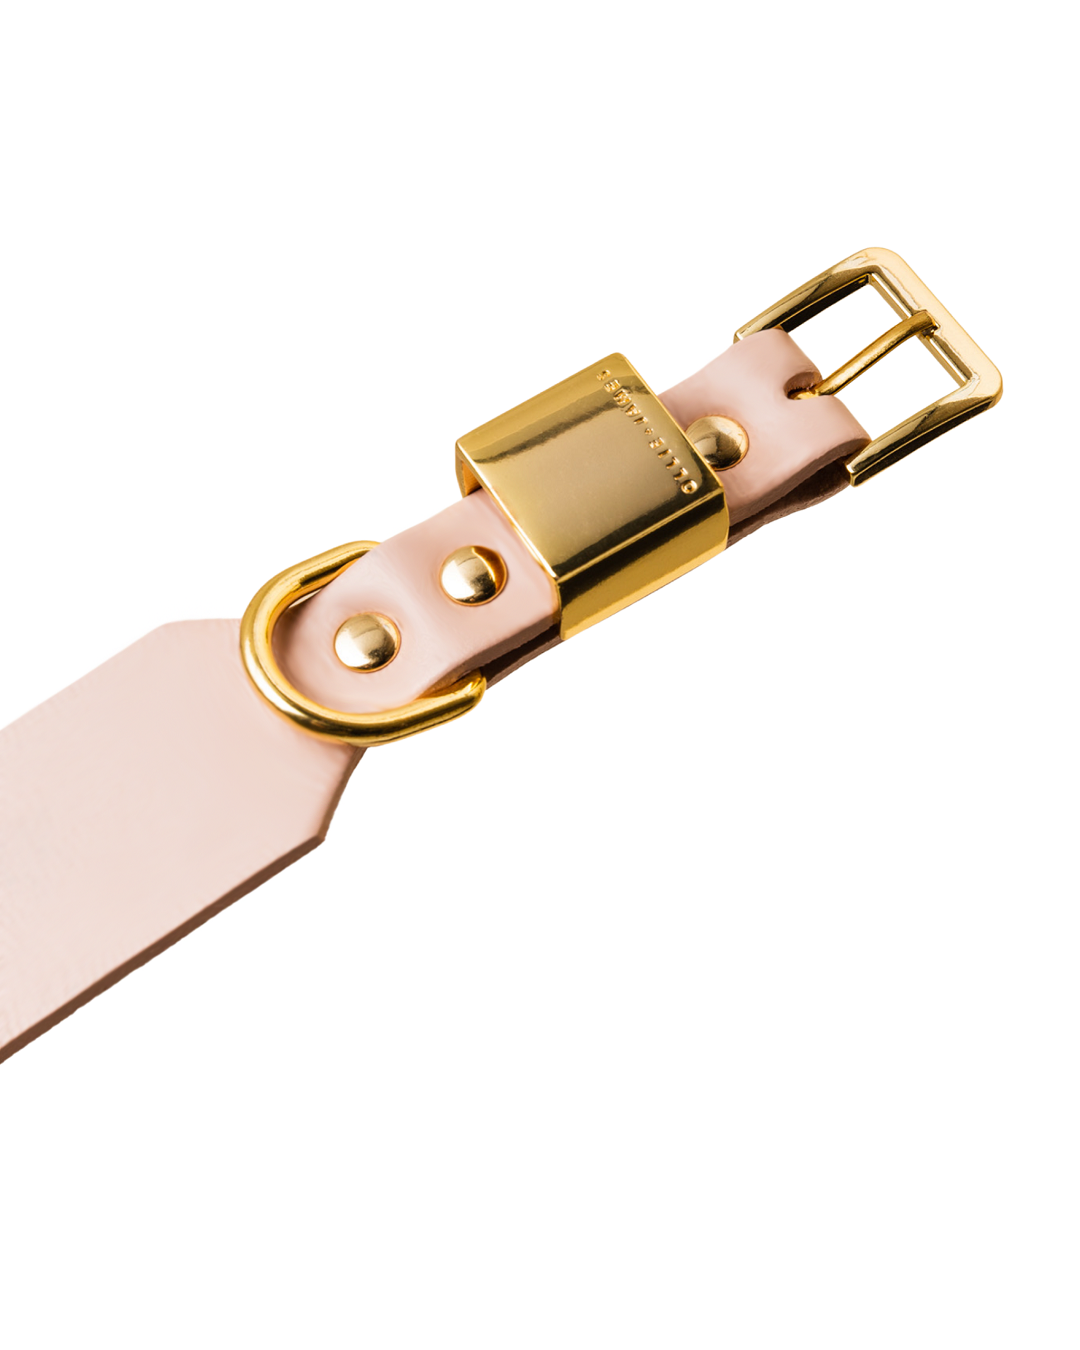 Ollie and James collar in sable pink leather